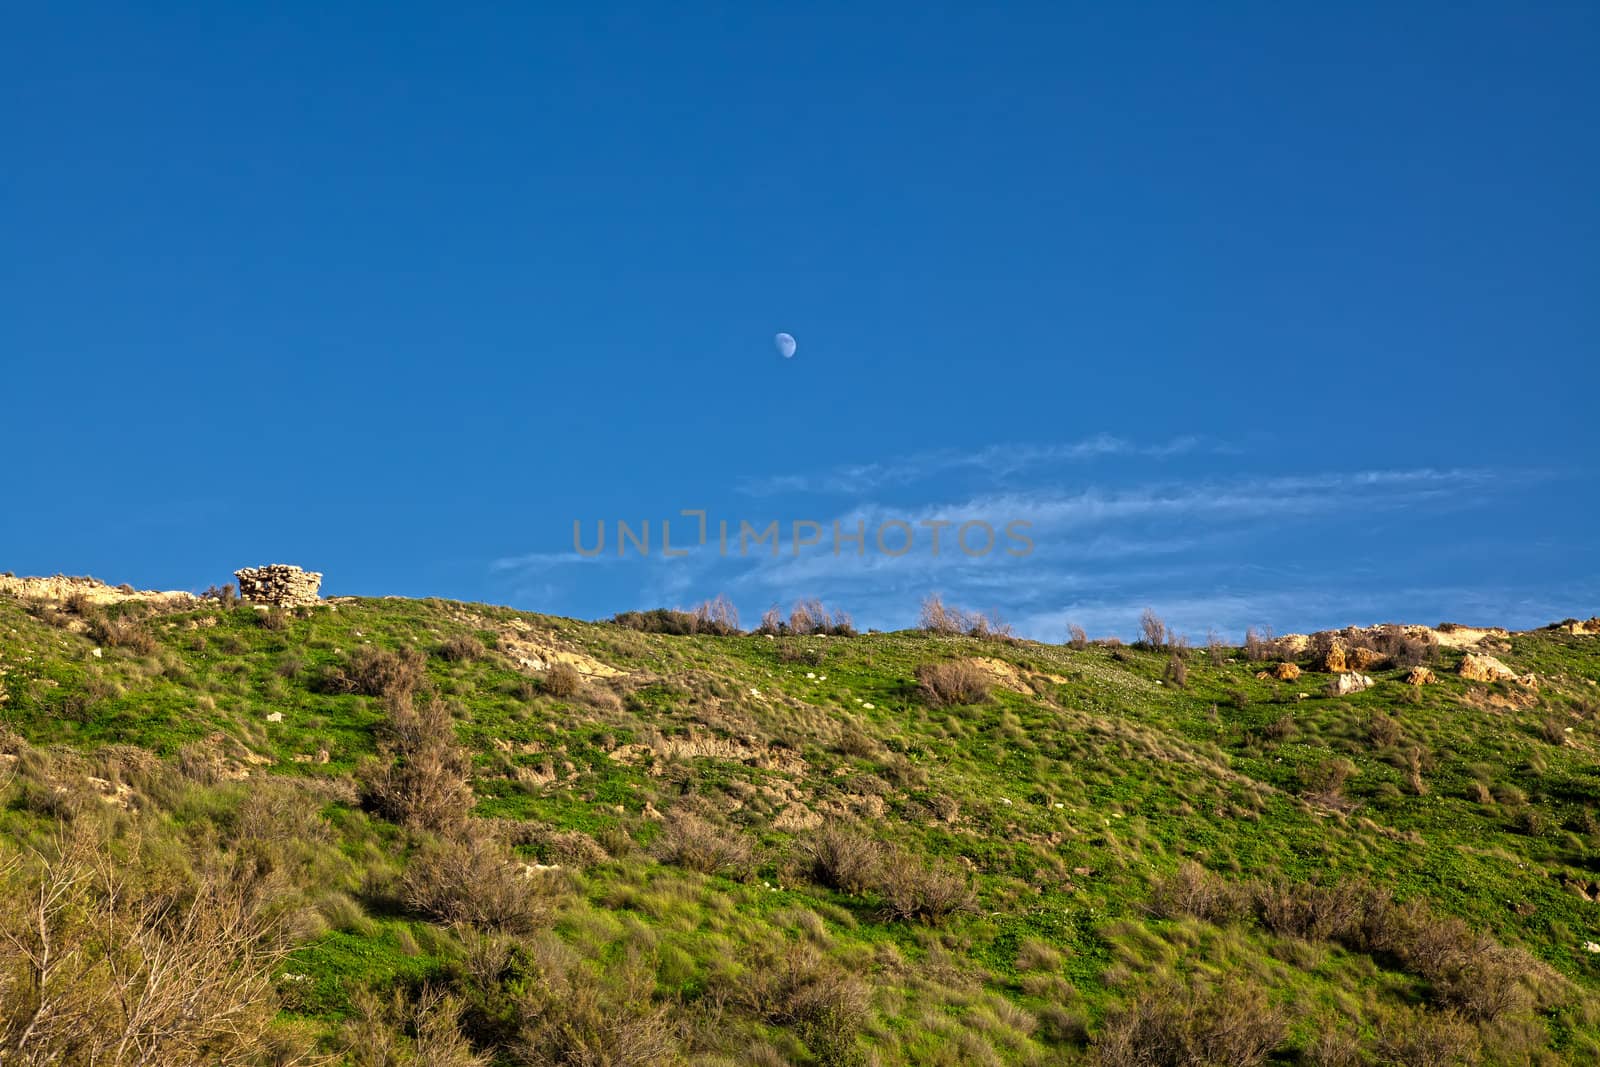 A first quarter moon overlooking the beautiful hillside at Ghajn Tuffieha in Malta.  The deep blue sky adds allure and contrast to the whole picture.